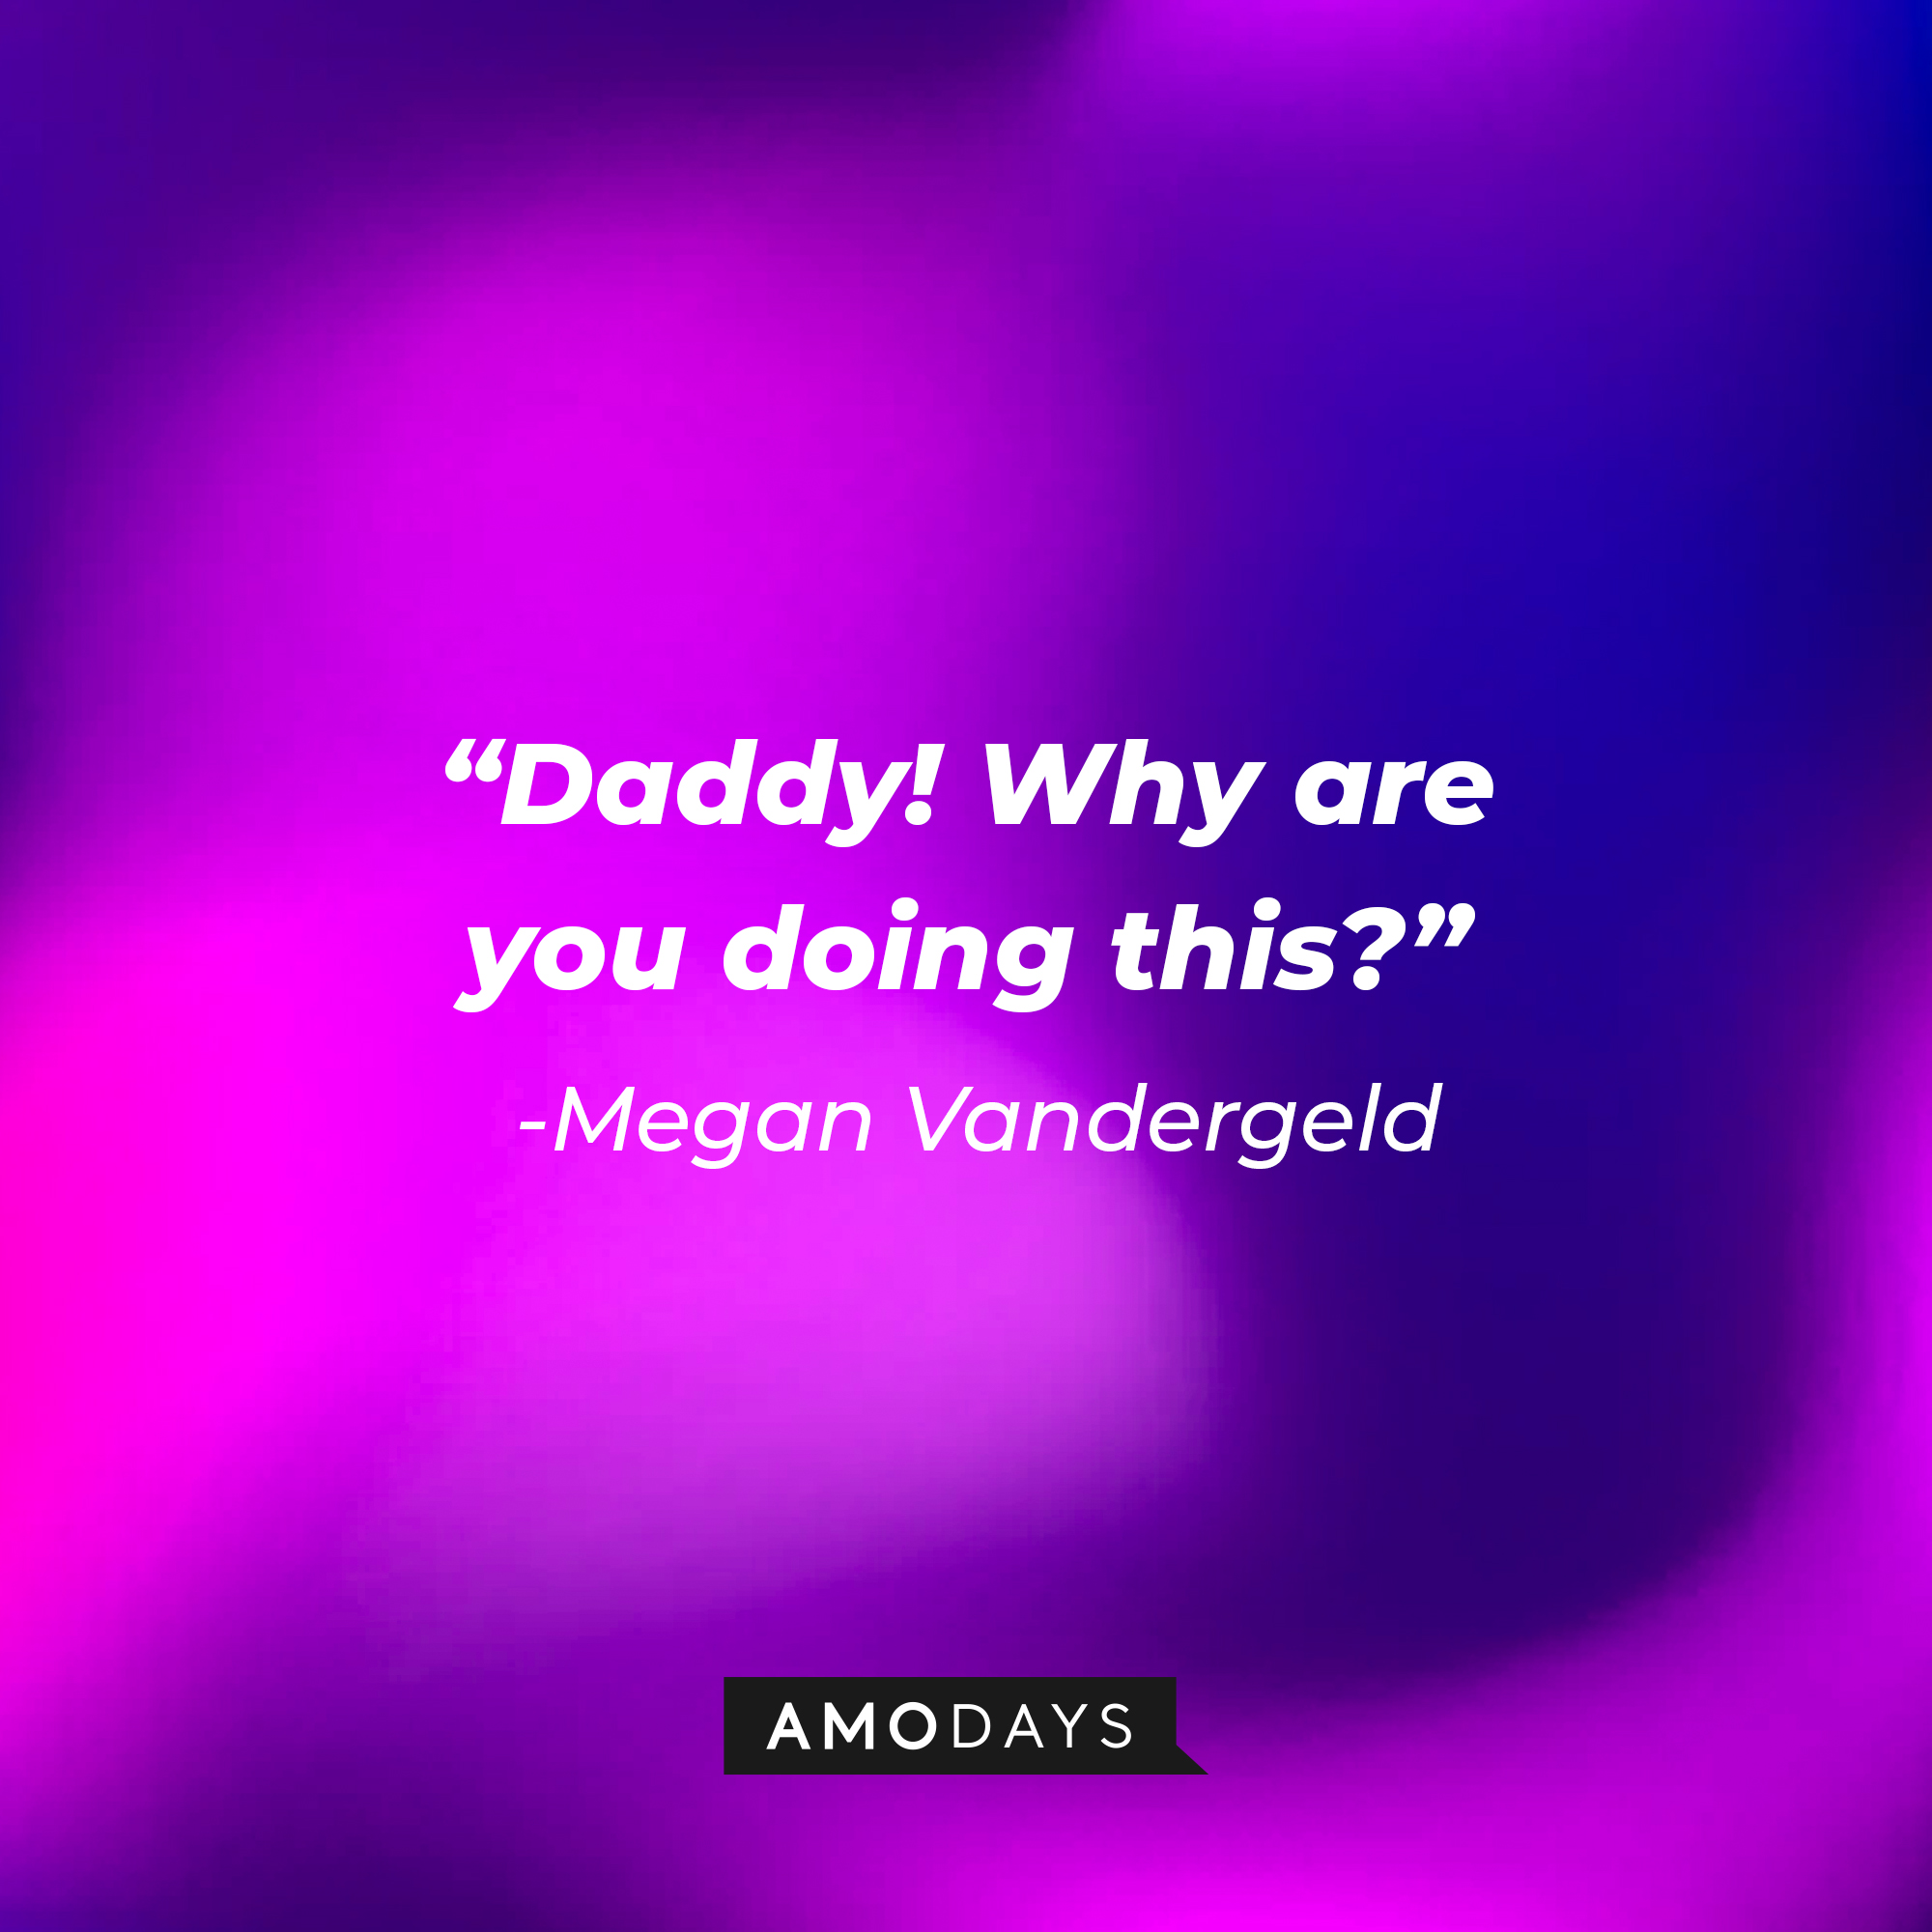 Megan Vandergeld’s quote: “Daddy! Why are you doing this?” | Source: AmoDays